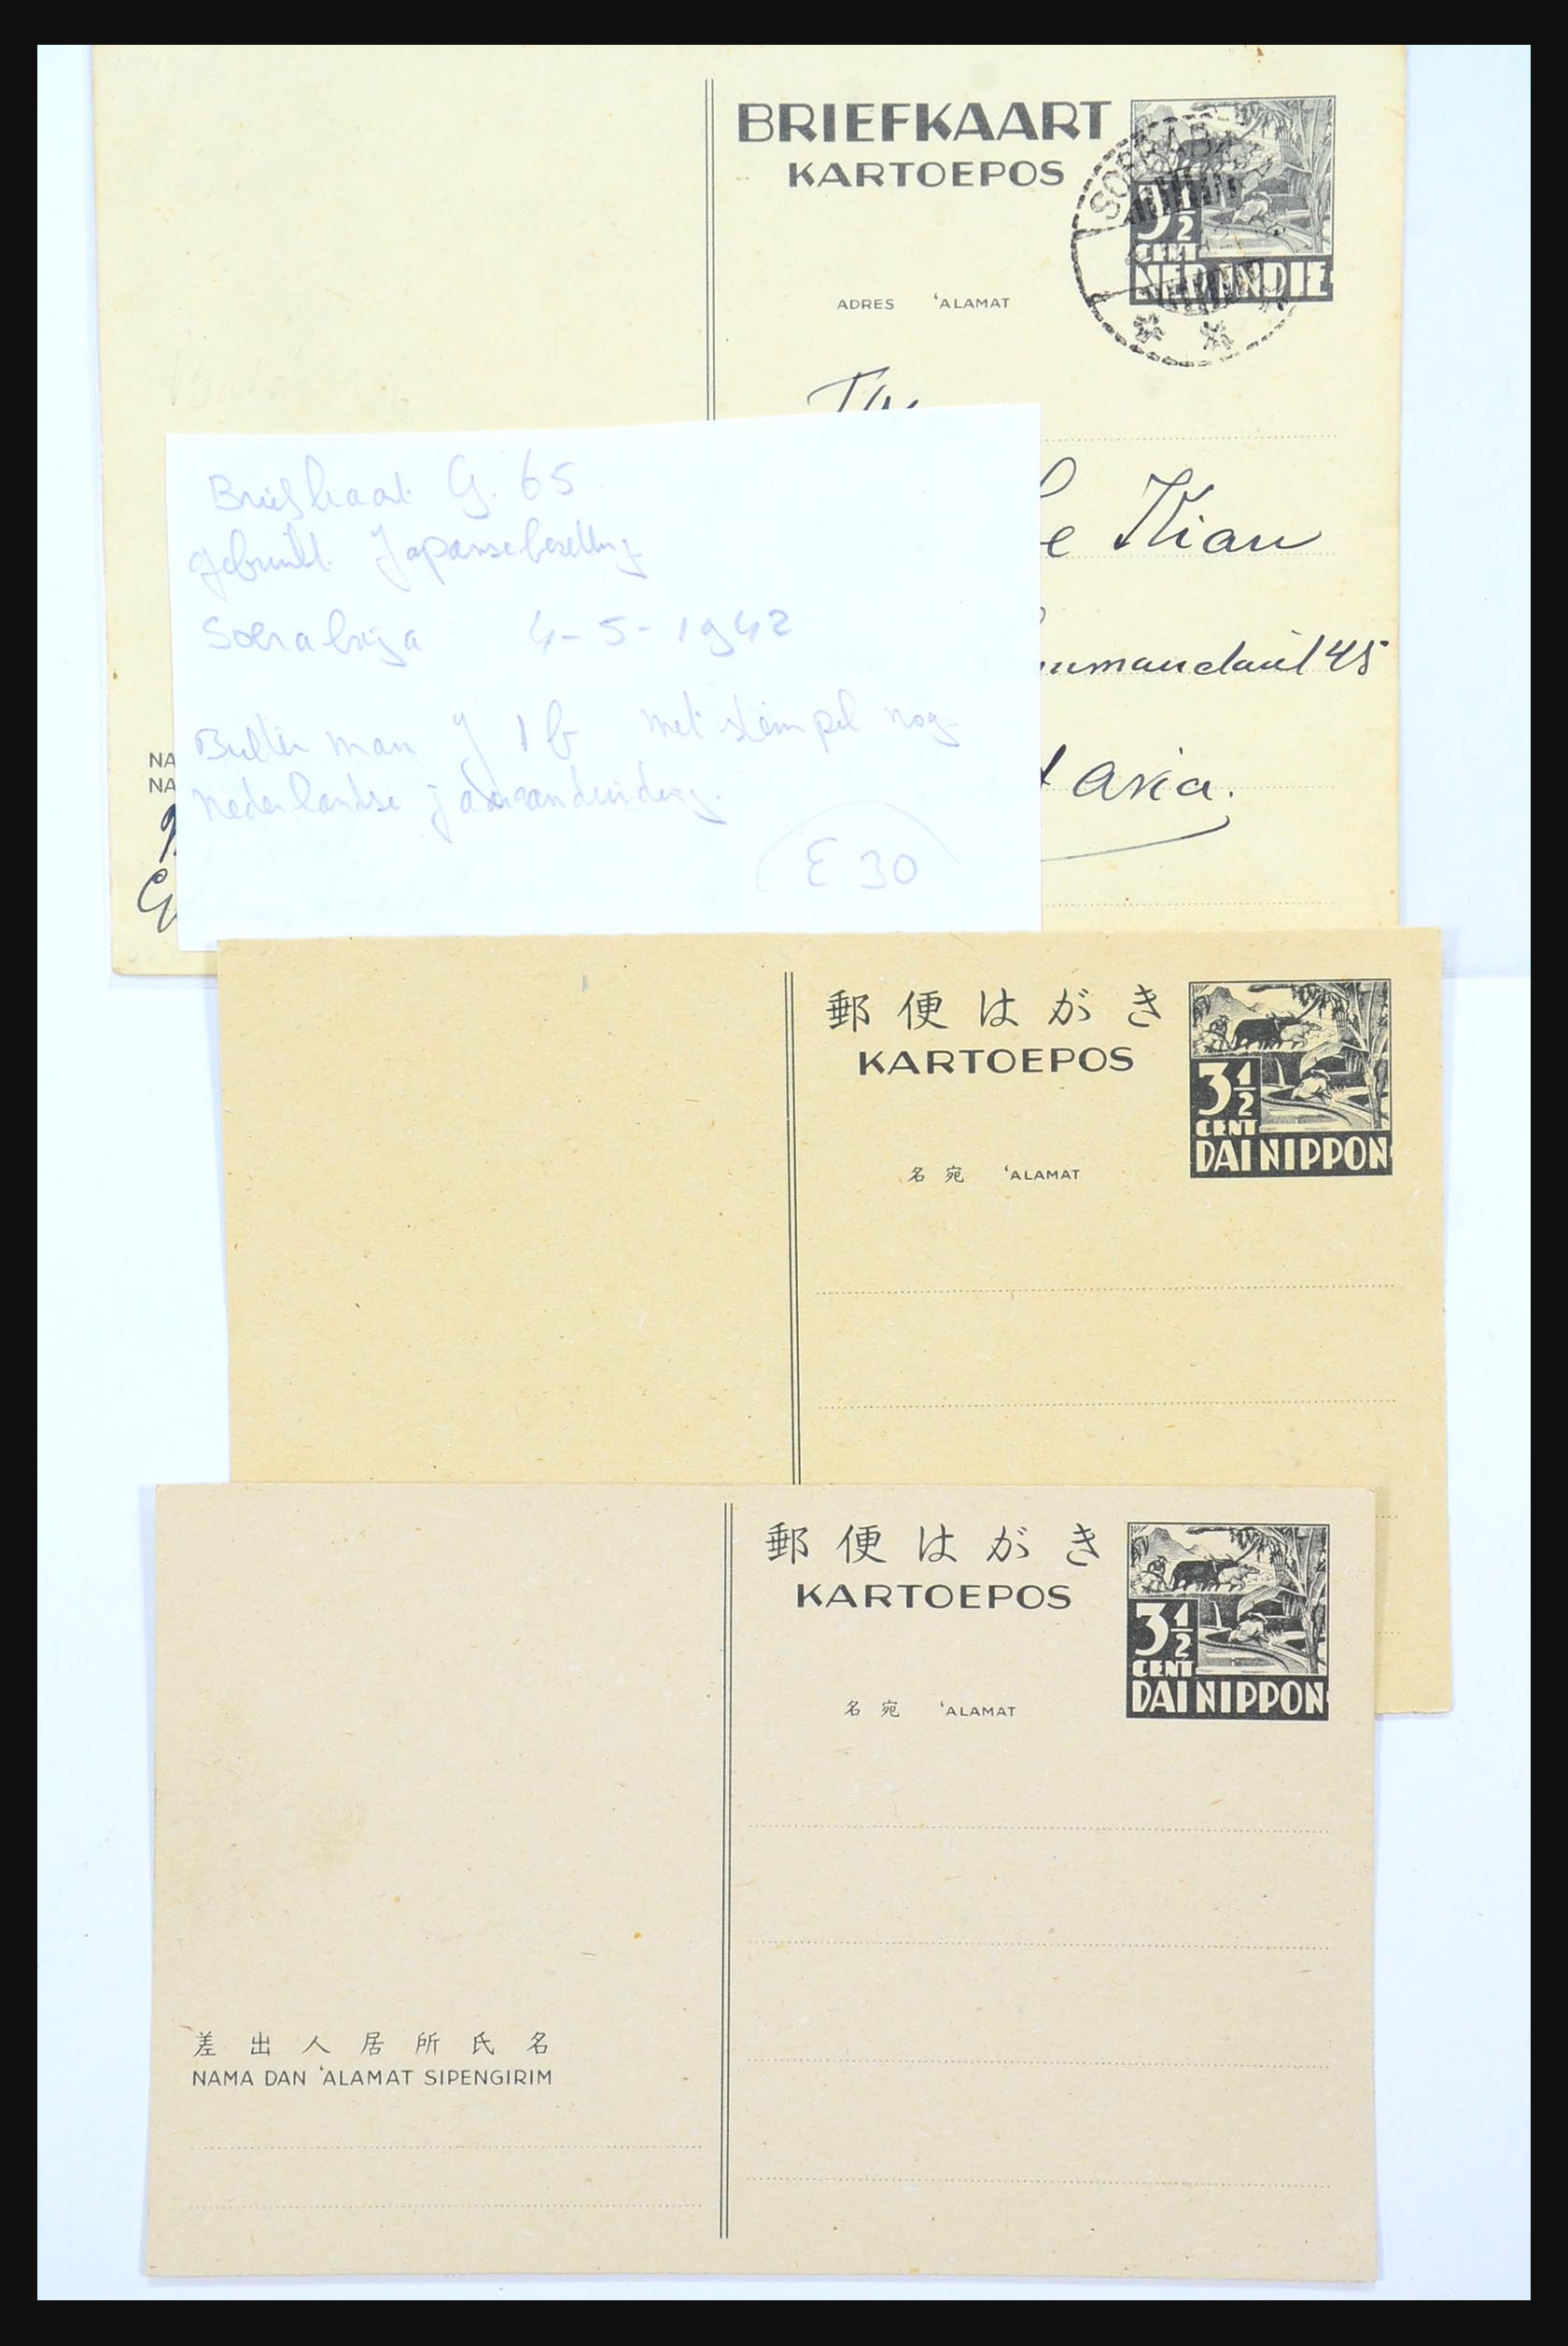 31362 060 - 31362 Netherlands Indies Japanese occupation covers 1942-1945.